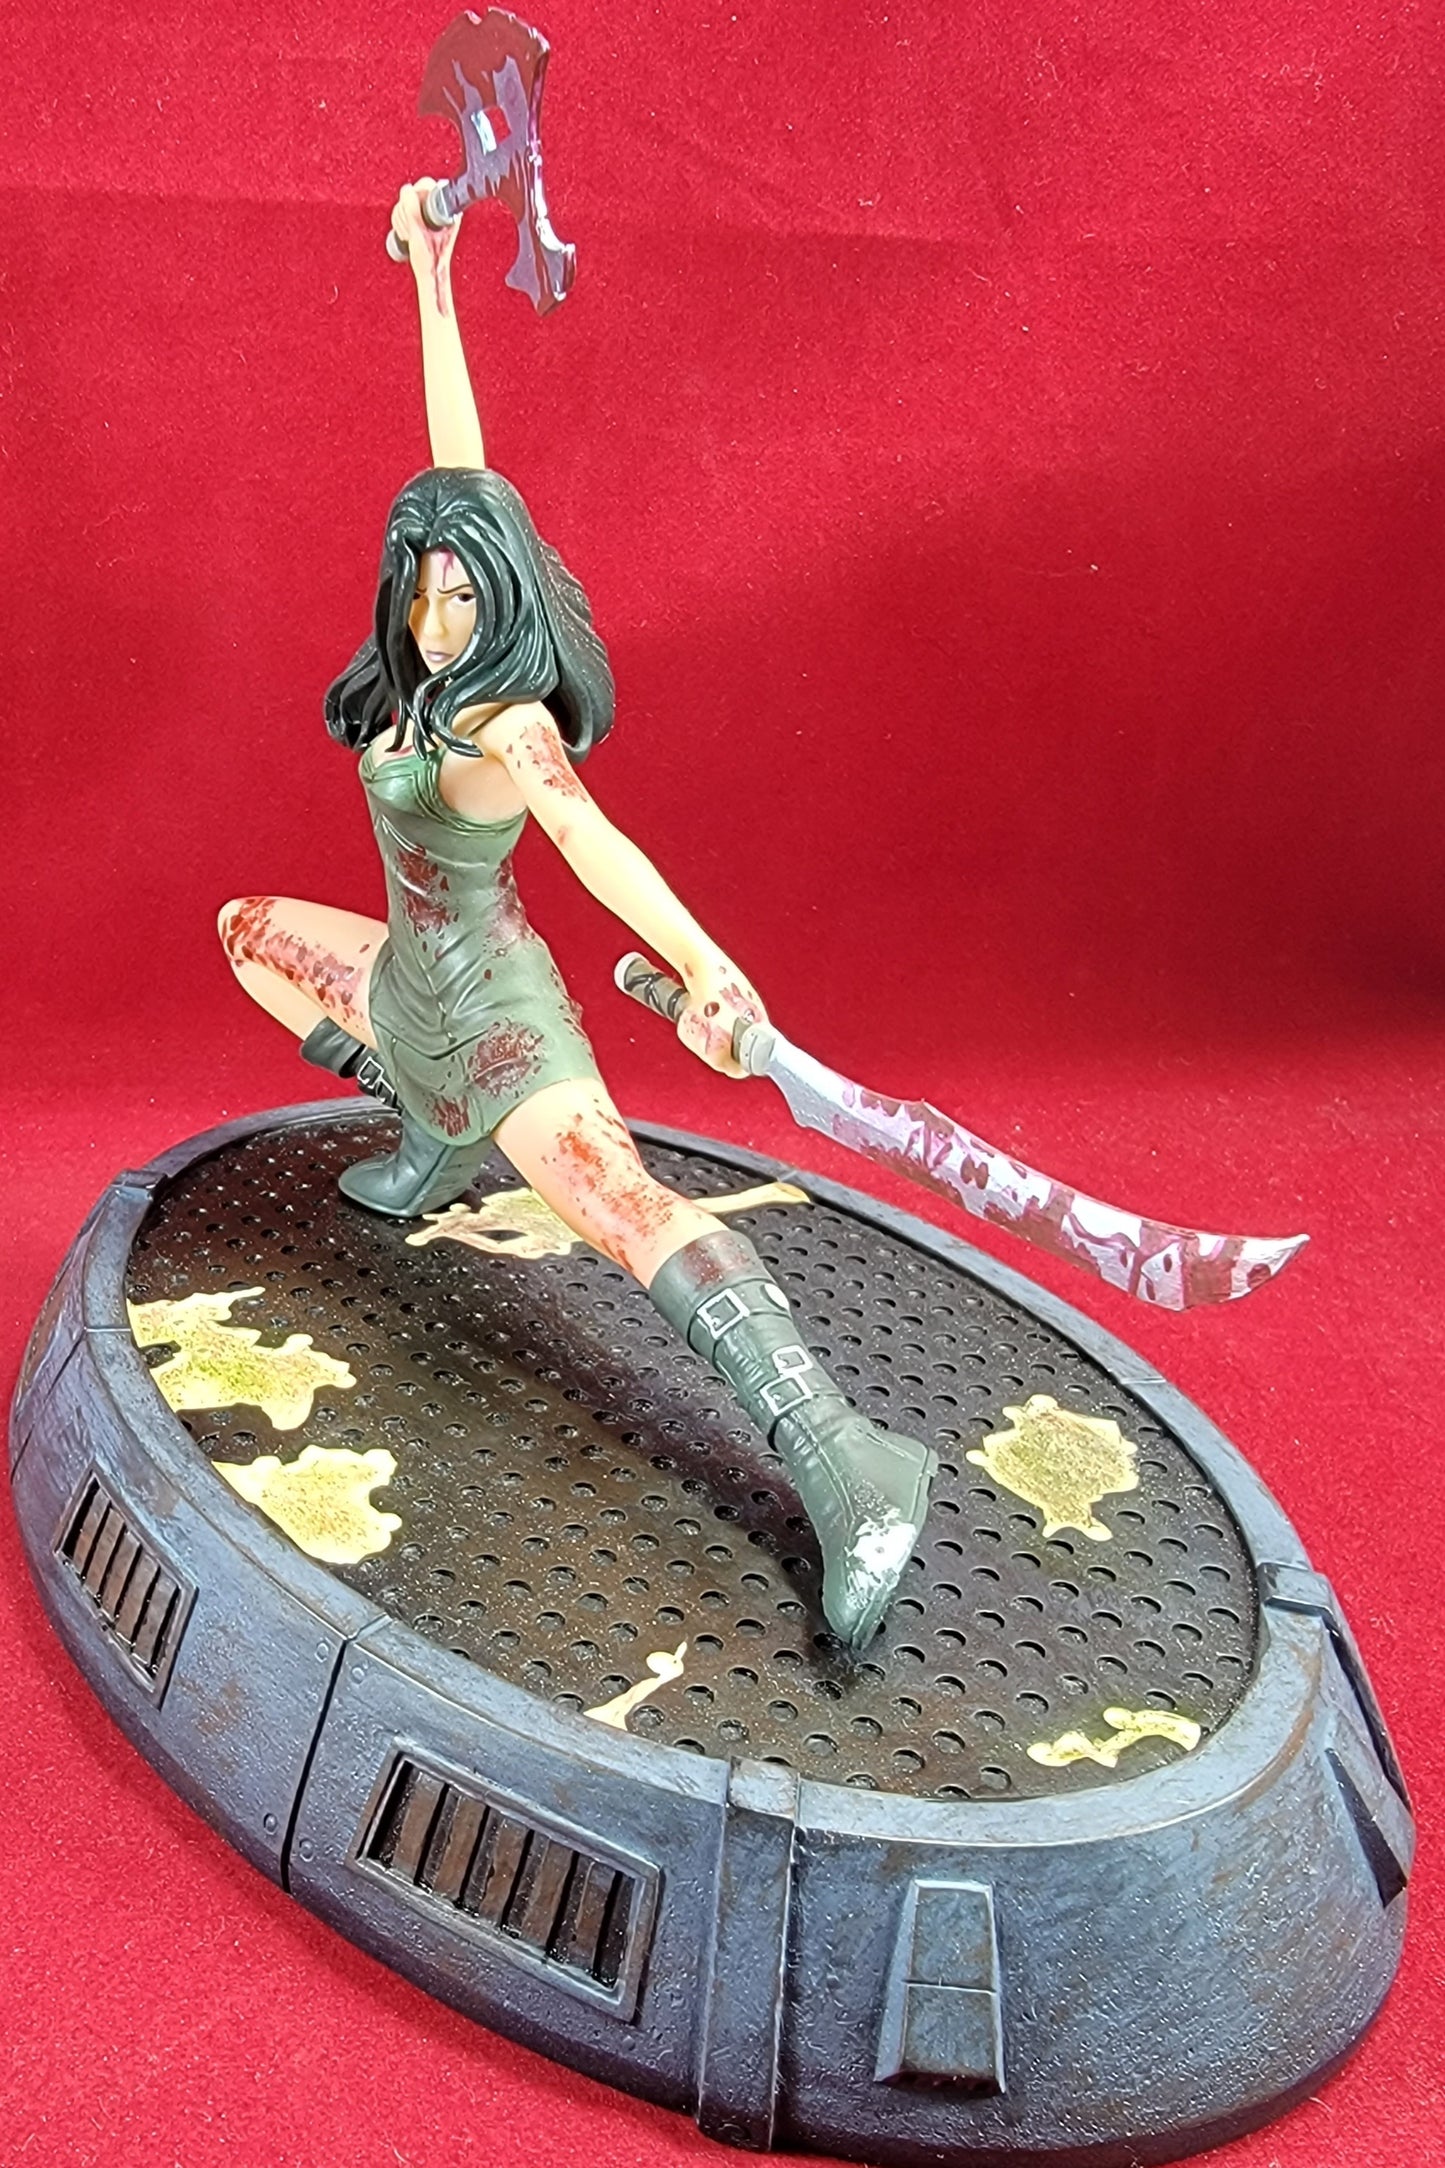 Brand new river Tam statue (nib)
big Damm heroes river tam hand-painted resin Maquette by Mohammad f Hague 0695 / 1500. statue base 7×4 inches with statue overall height almost 6 inches.